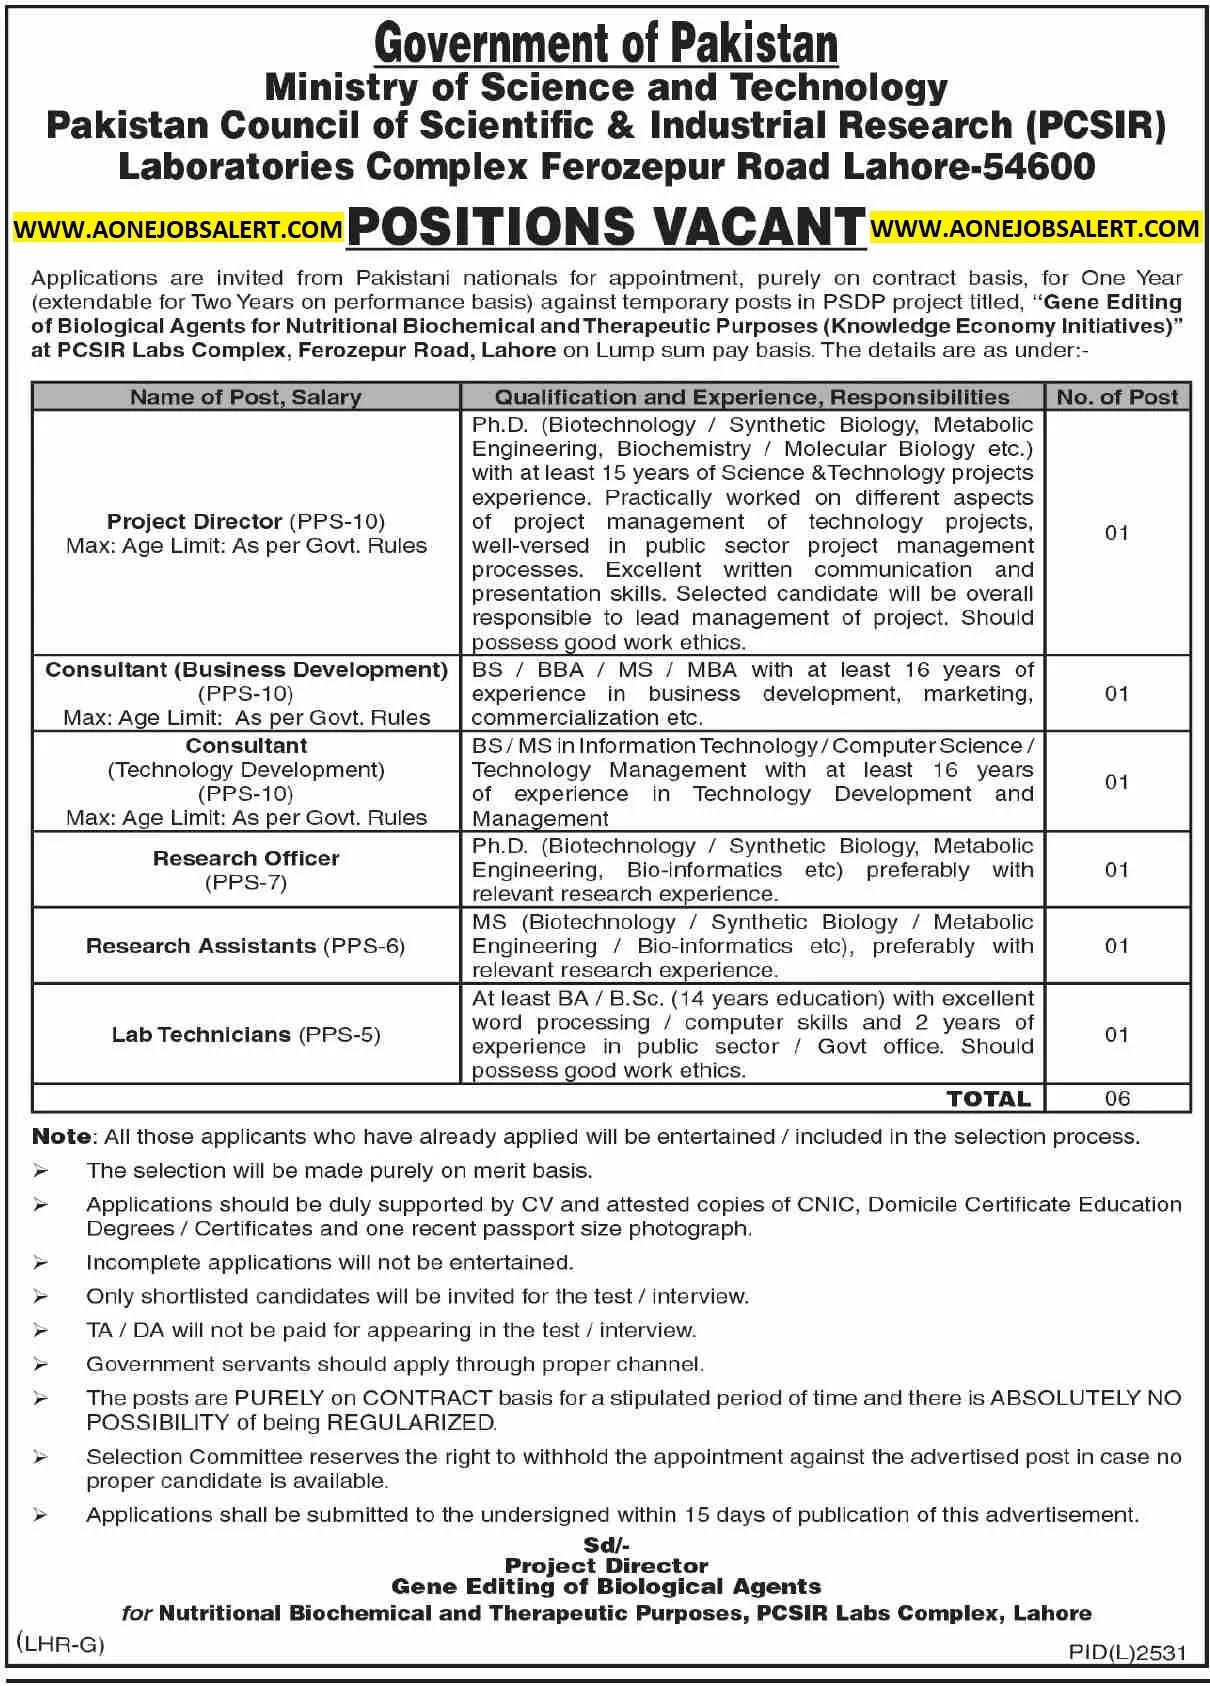 Pakistan Council of Scientific & Industrial Research Jobs